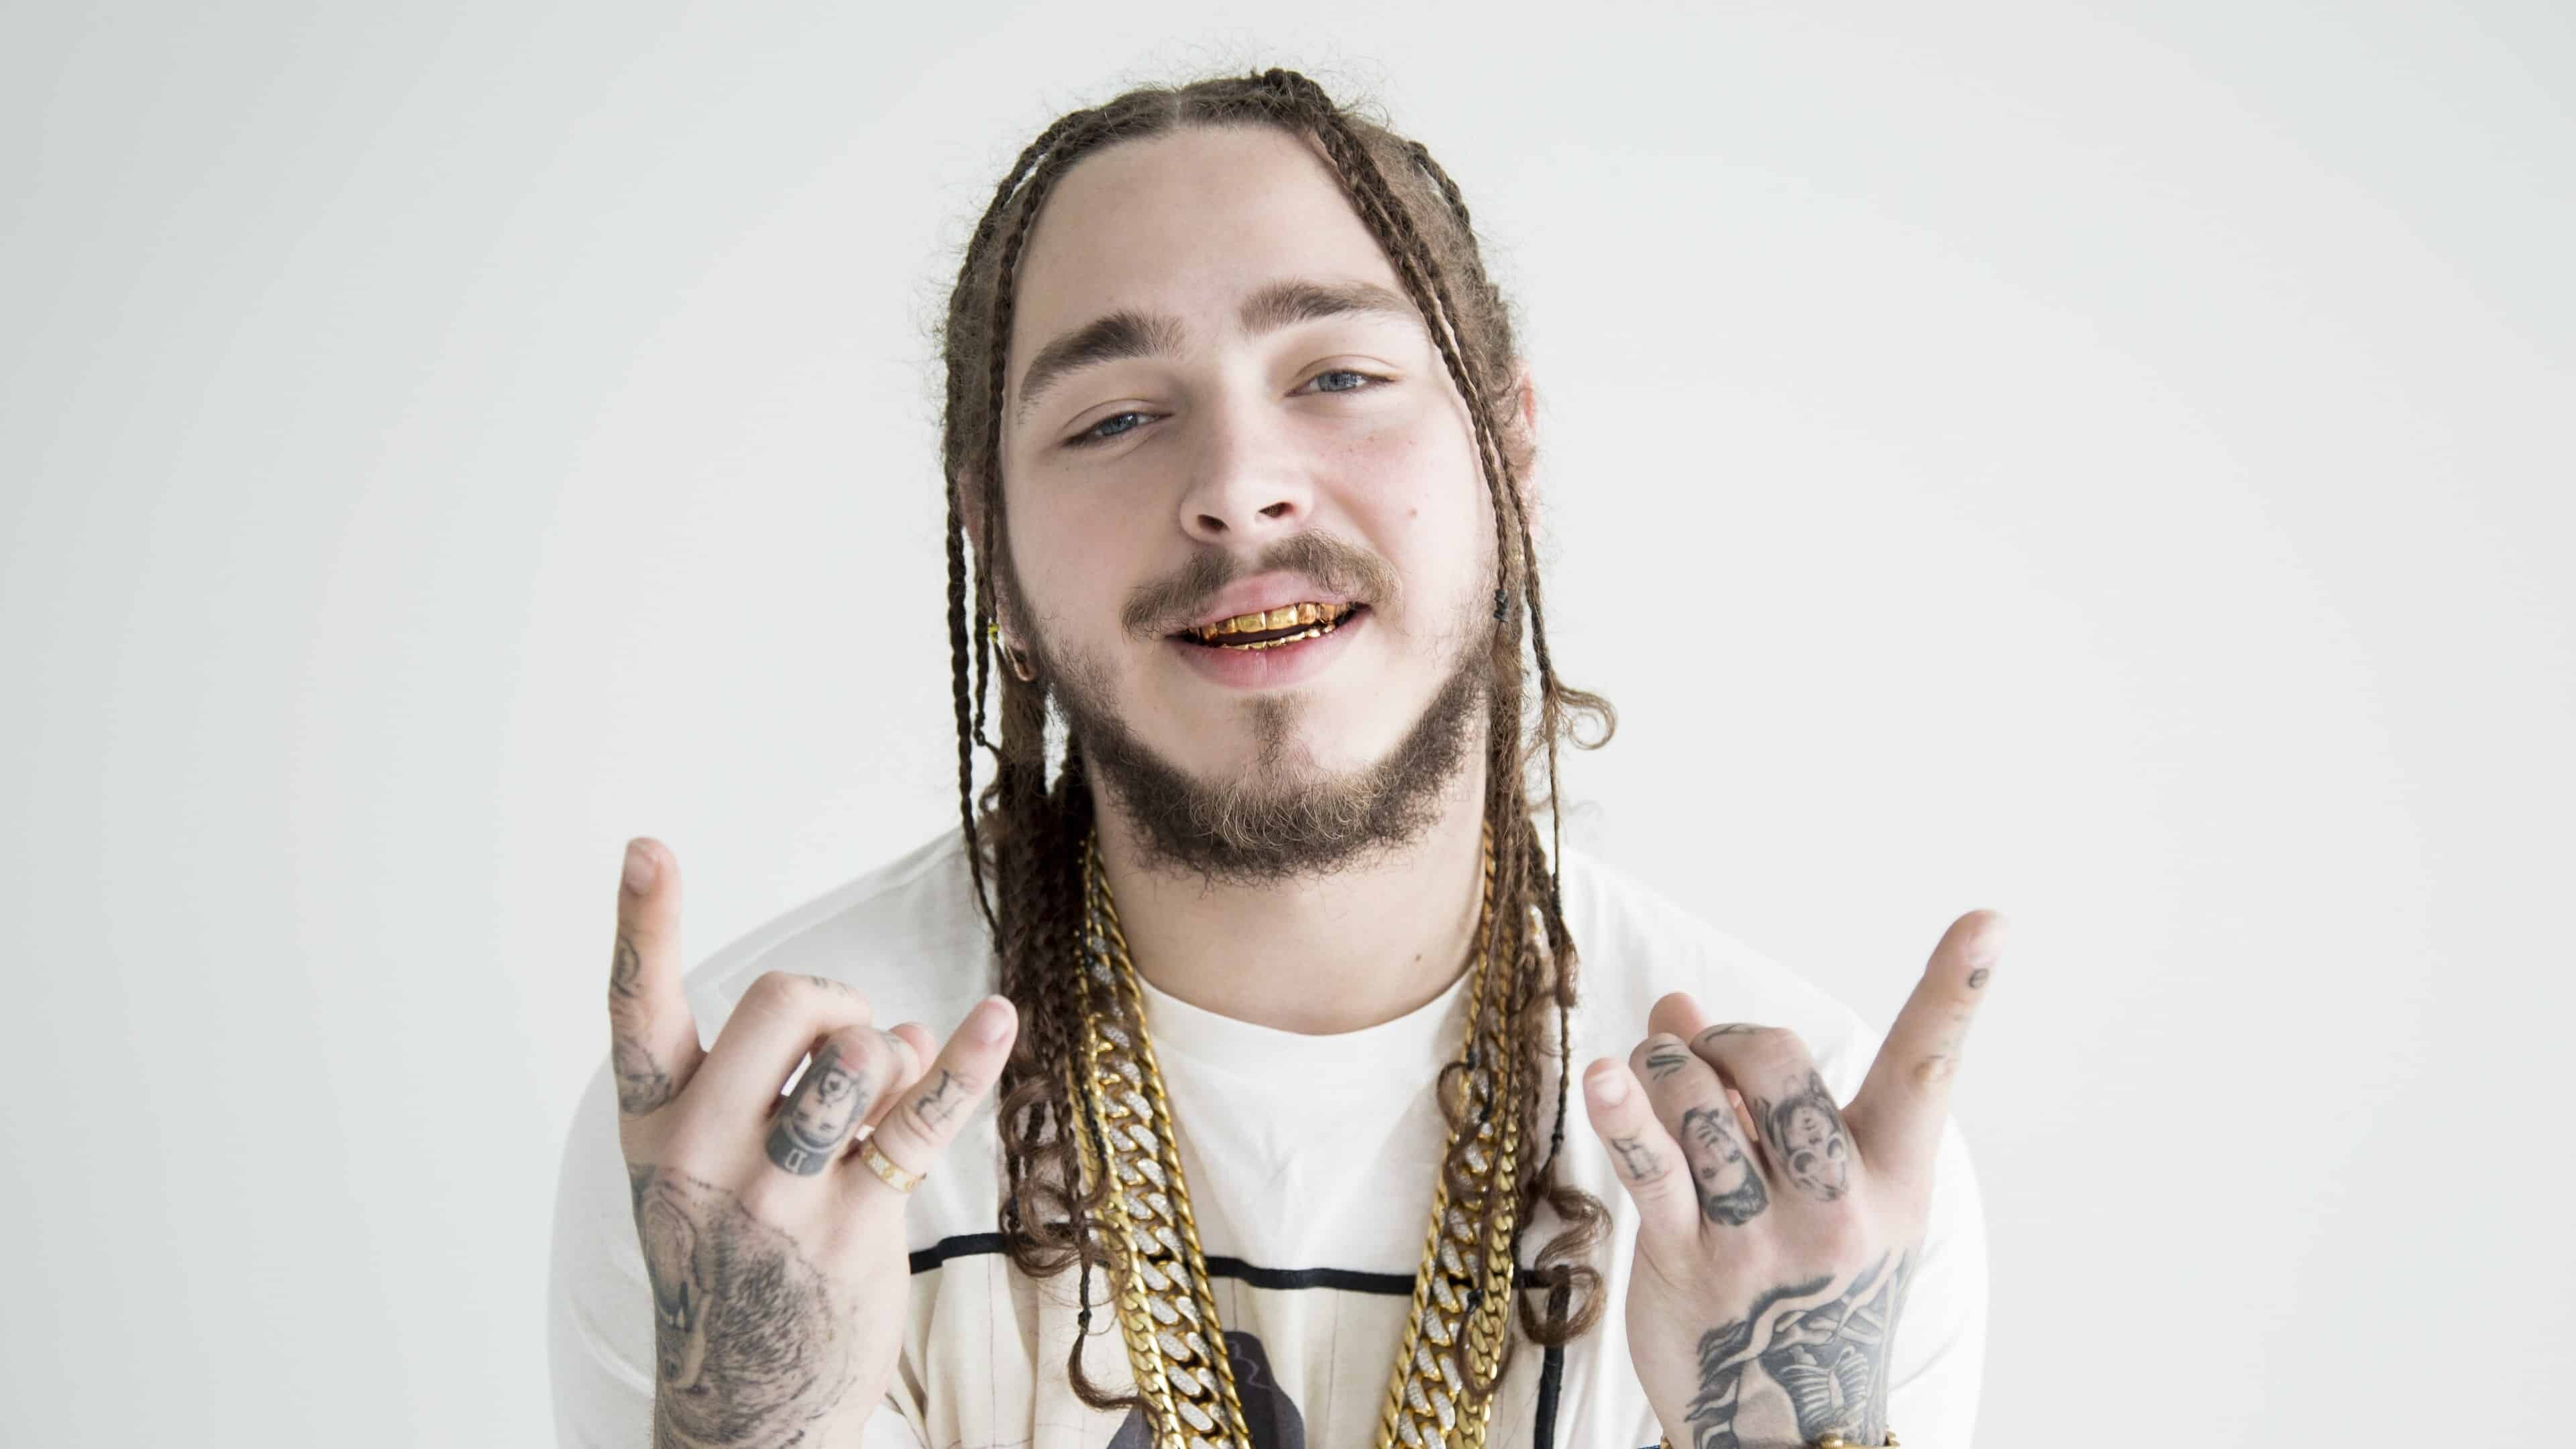 Post Malone: Austin Richard Post, an American rapper, singer, songwriter, and record producer. 3840x2160 4K Background.